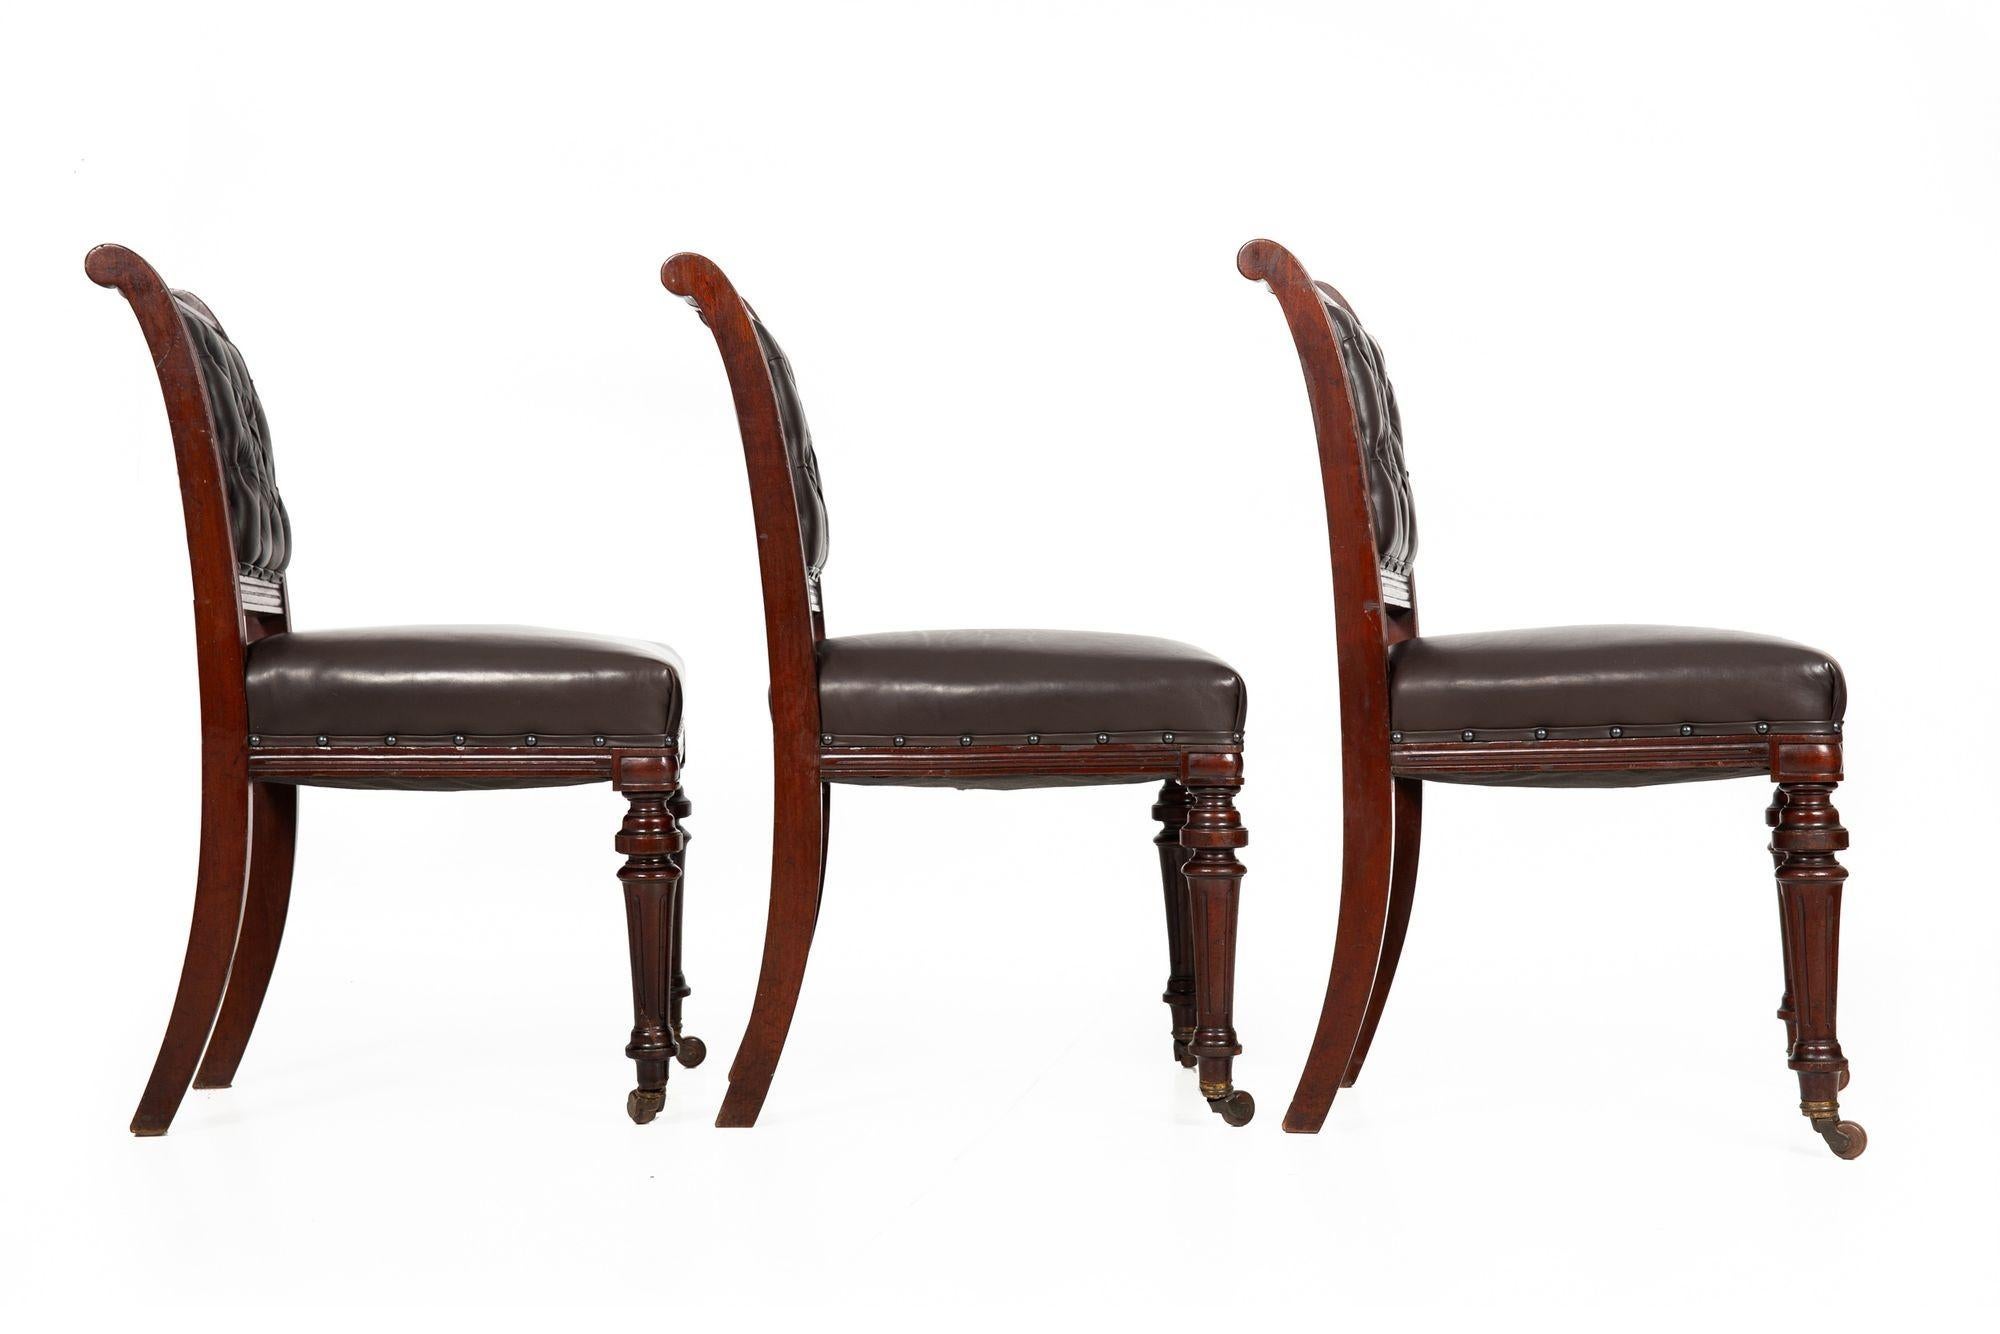 Set of 6 English Antique Mahogany and Leather Dining Chairs, 19th Century For Sale 1